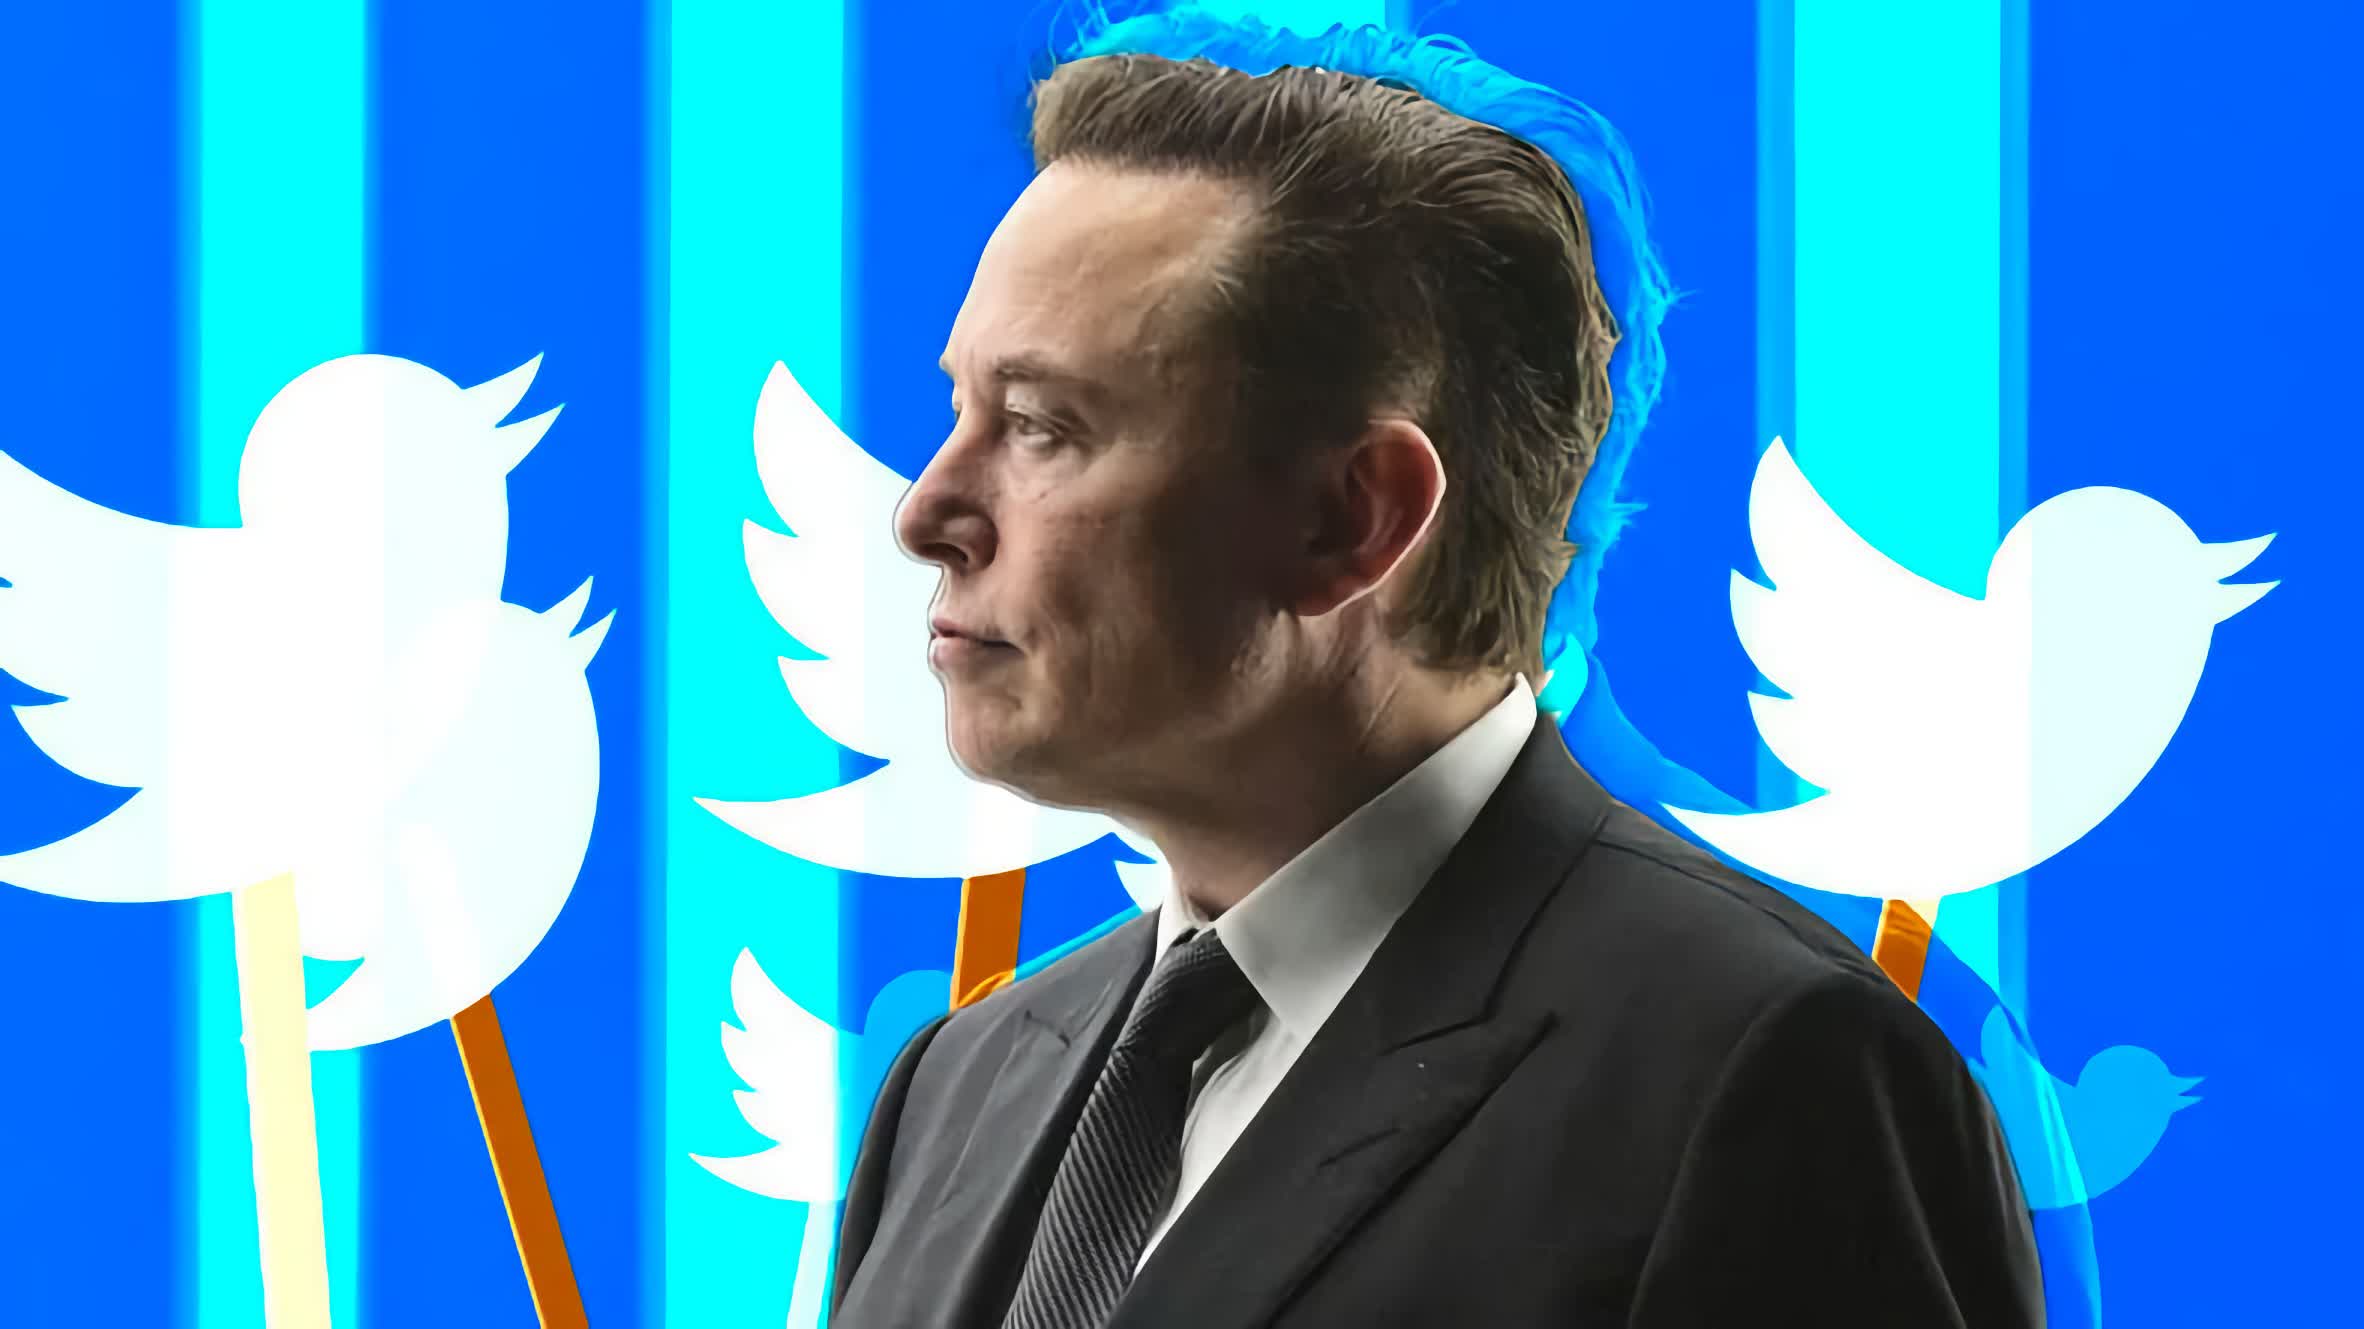 Elon Musk finally takes control of Twitter, fires CEO and other execs